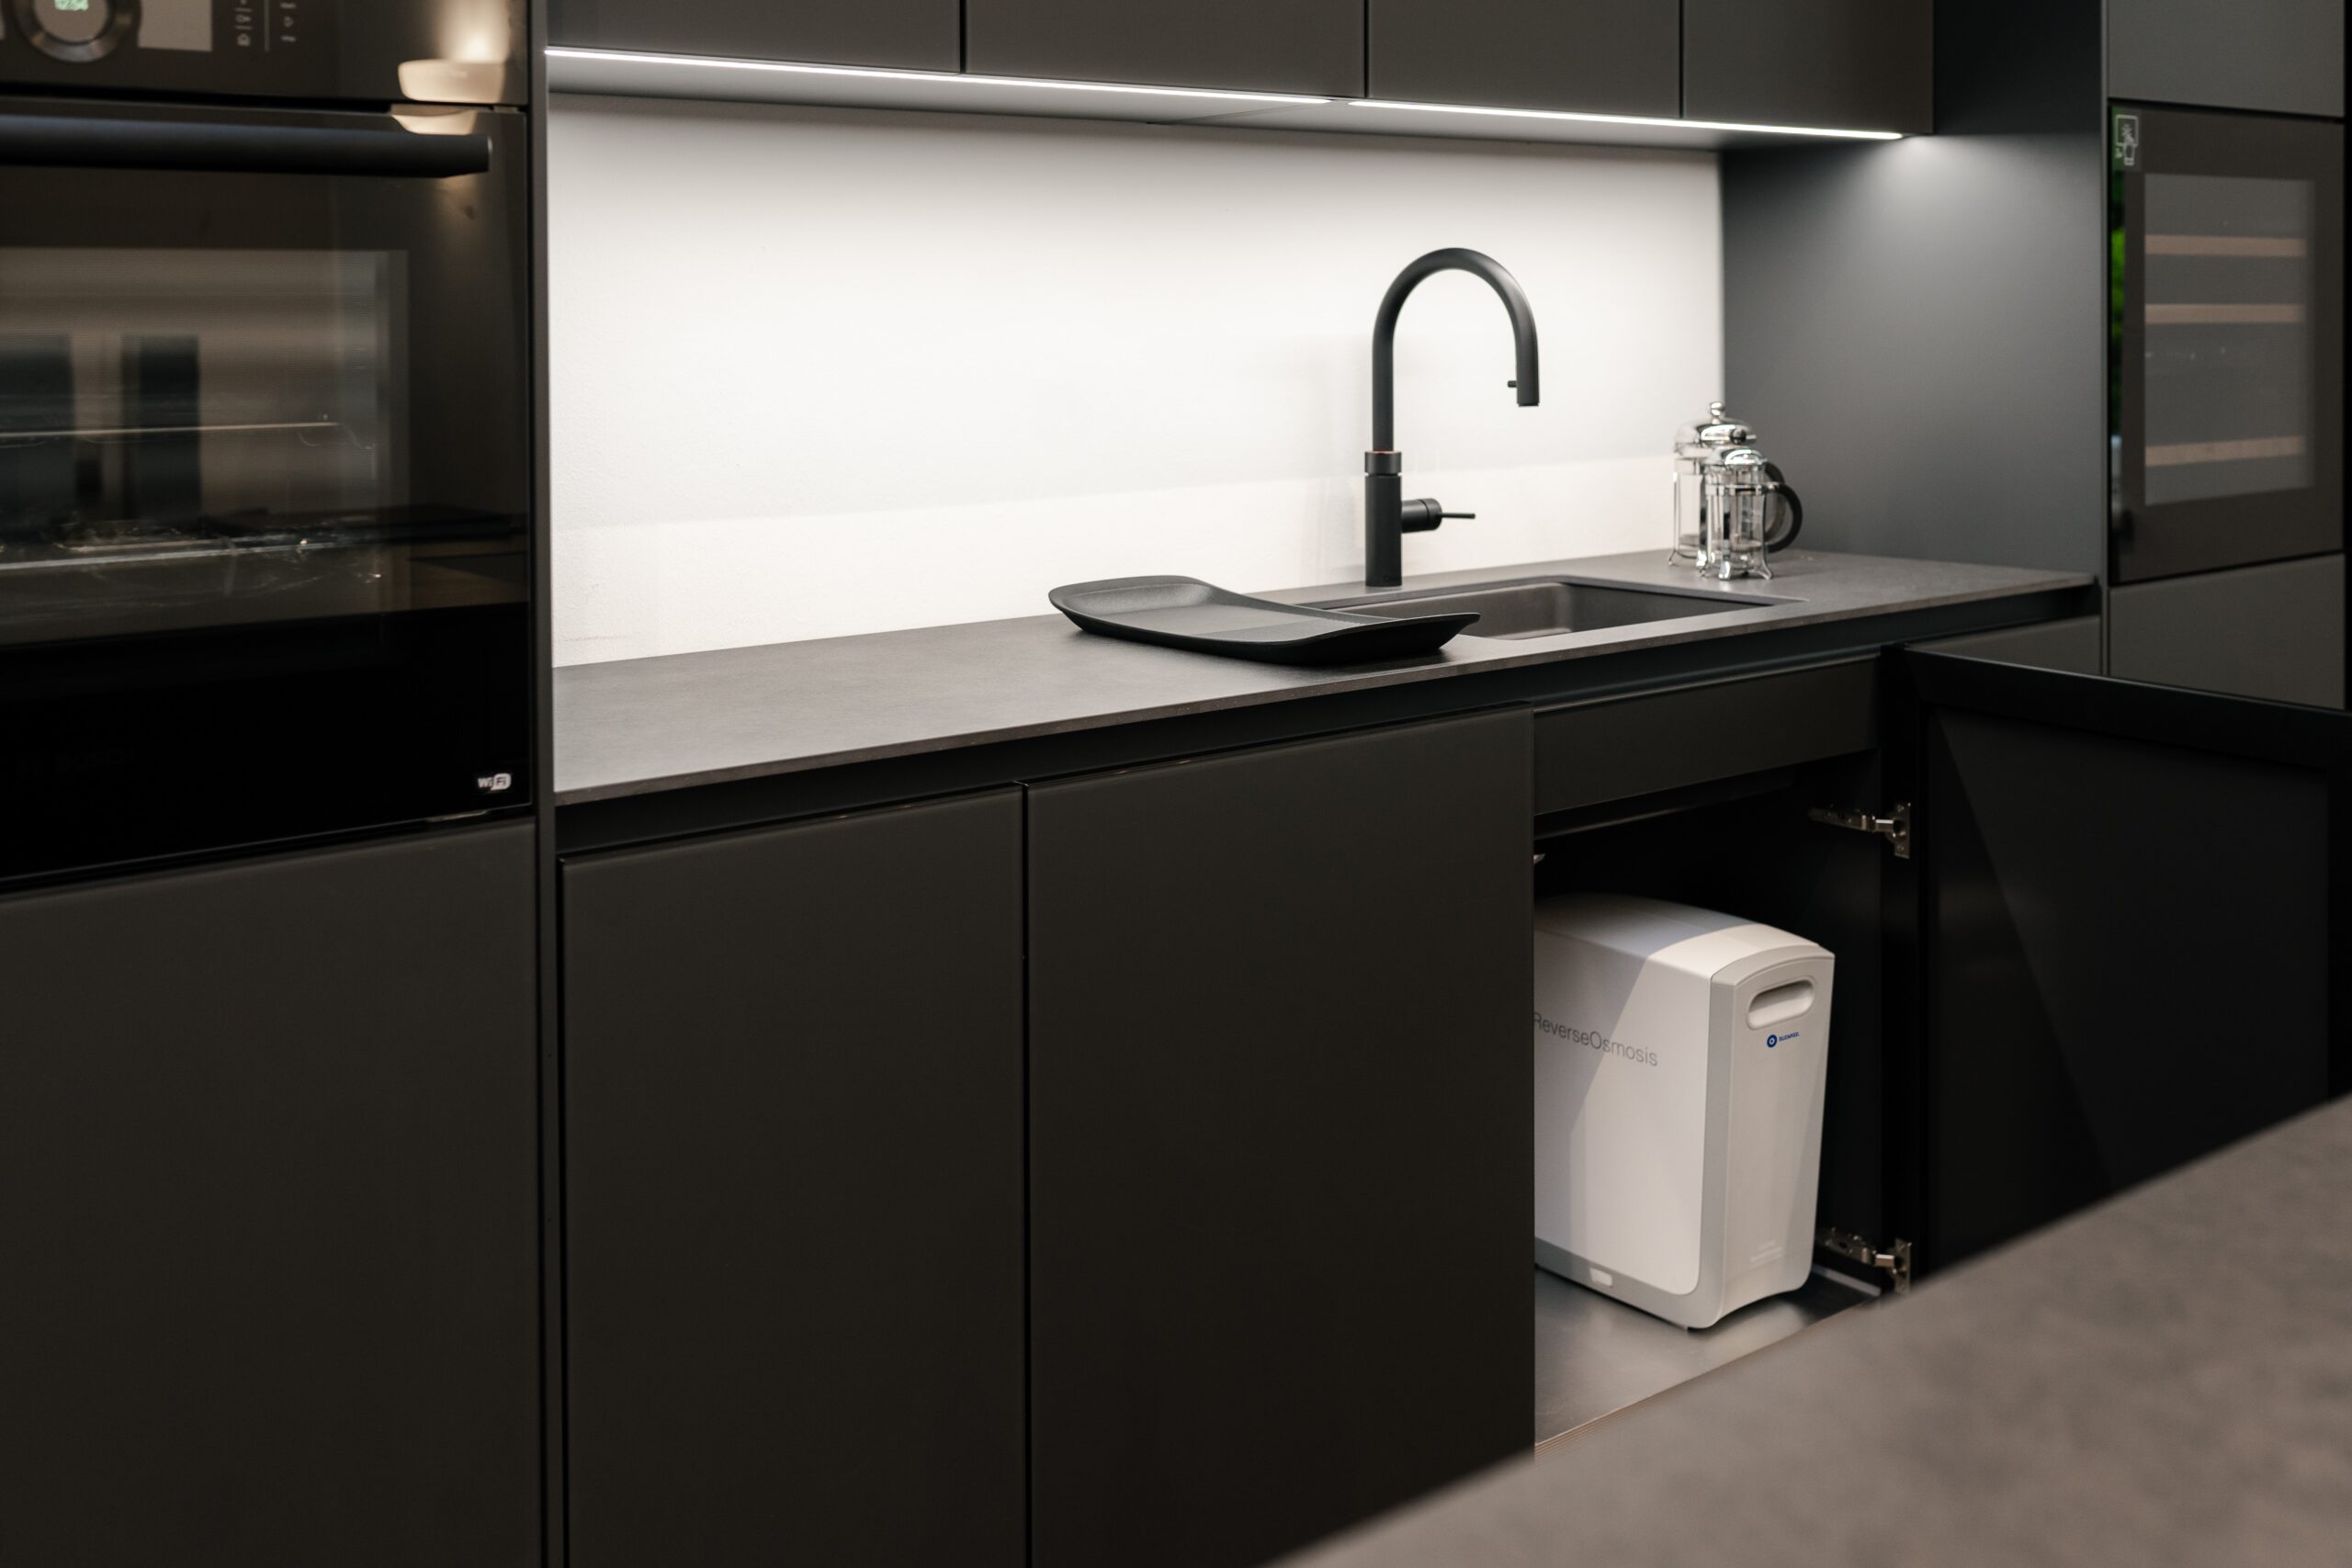 For those who really love the color black, pair your black kitchen countertops with all-black cabinets and appliances. Pictured: A black countertop with black appliances.